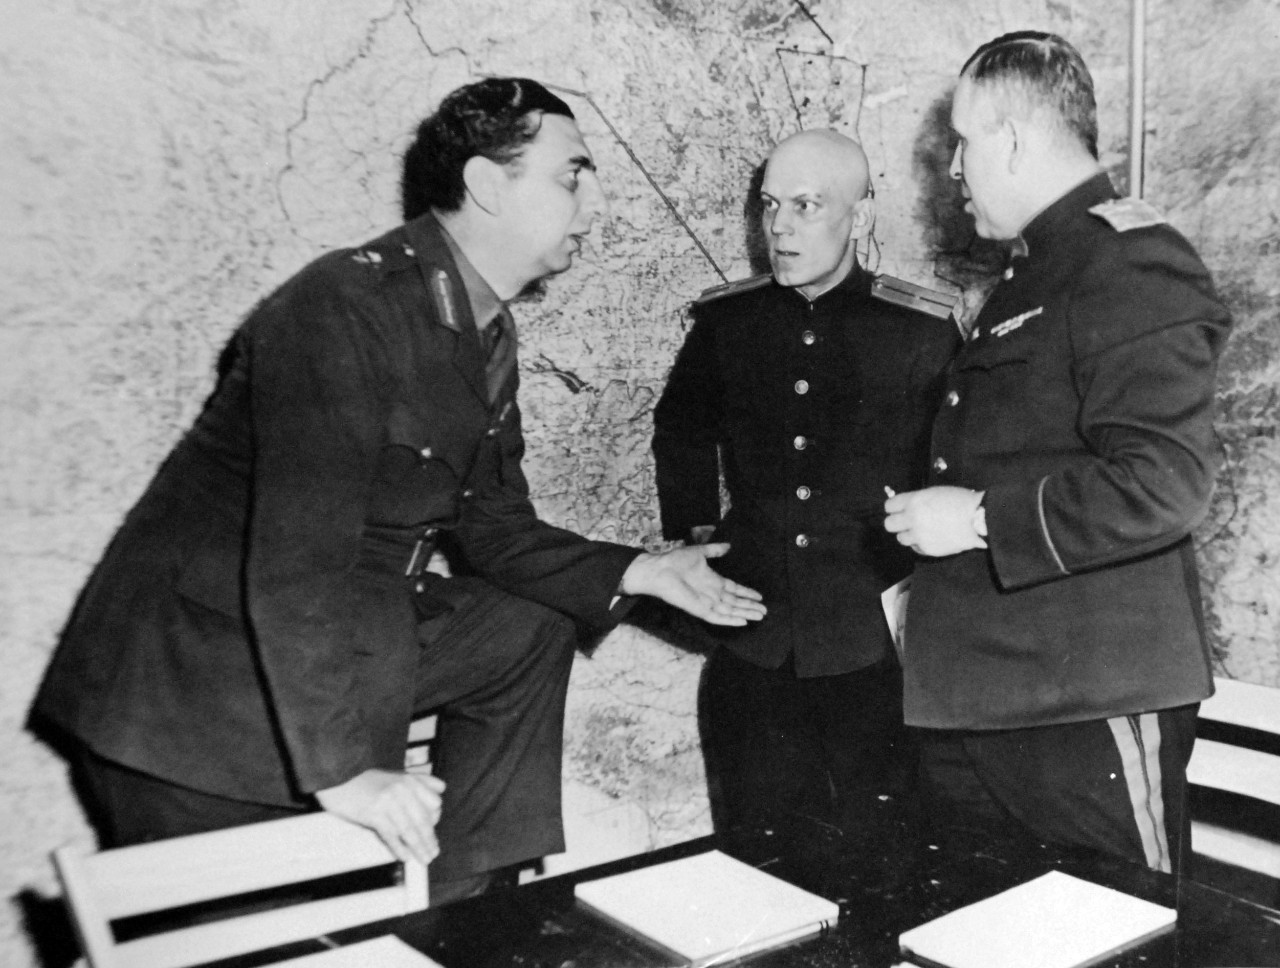 111-SC-27250a: Surrender of Germany, 7 May 1945.  Major General K.W.D. Strong, (left), SHAEF, G-2, discusses reaction of German delegation to unconditional surrender terms given them at SHAEF Forward Headquarters in Reims, France, with the Russian representatives at the event which ended hostilities in Europe.  The Russian officers are, (left to right): Lieutenant Ivan Cherniaeff, Aide and Interpreter, and Major General of Artillery Ivan Alexeyevich Susloparov, who signed the surrender document for the Soviets.   U.S. Army Photograph.  Courtesy of the Library of Congress Collection, Lot-8988. (2015/10/16).